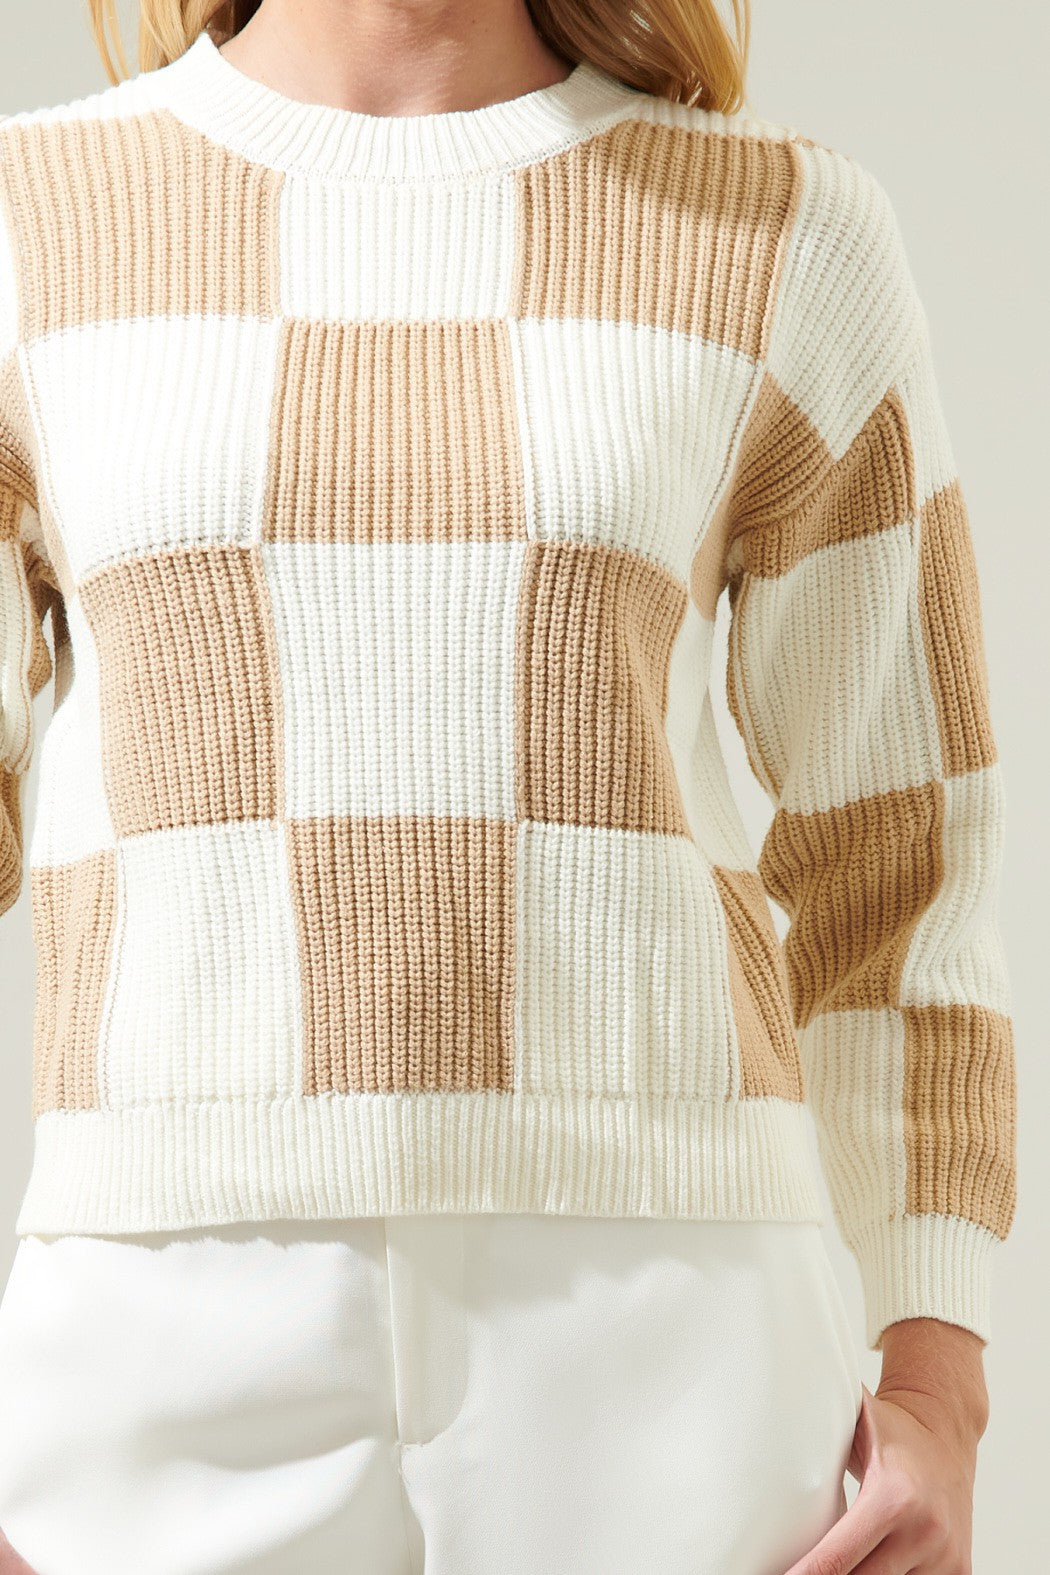 The Harlow Checkerboard Sweater